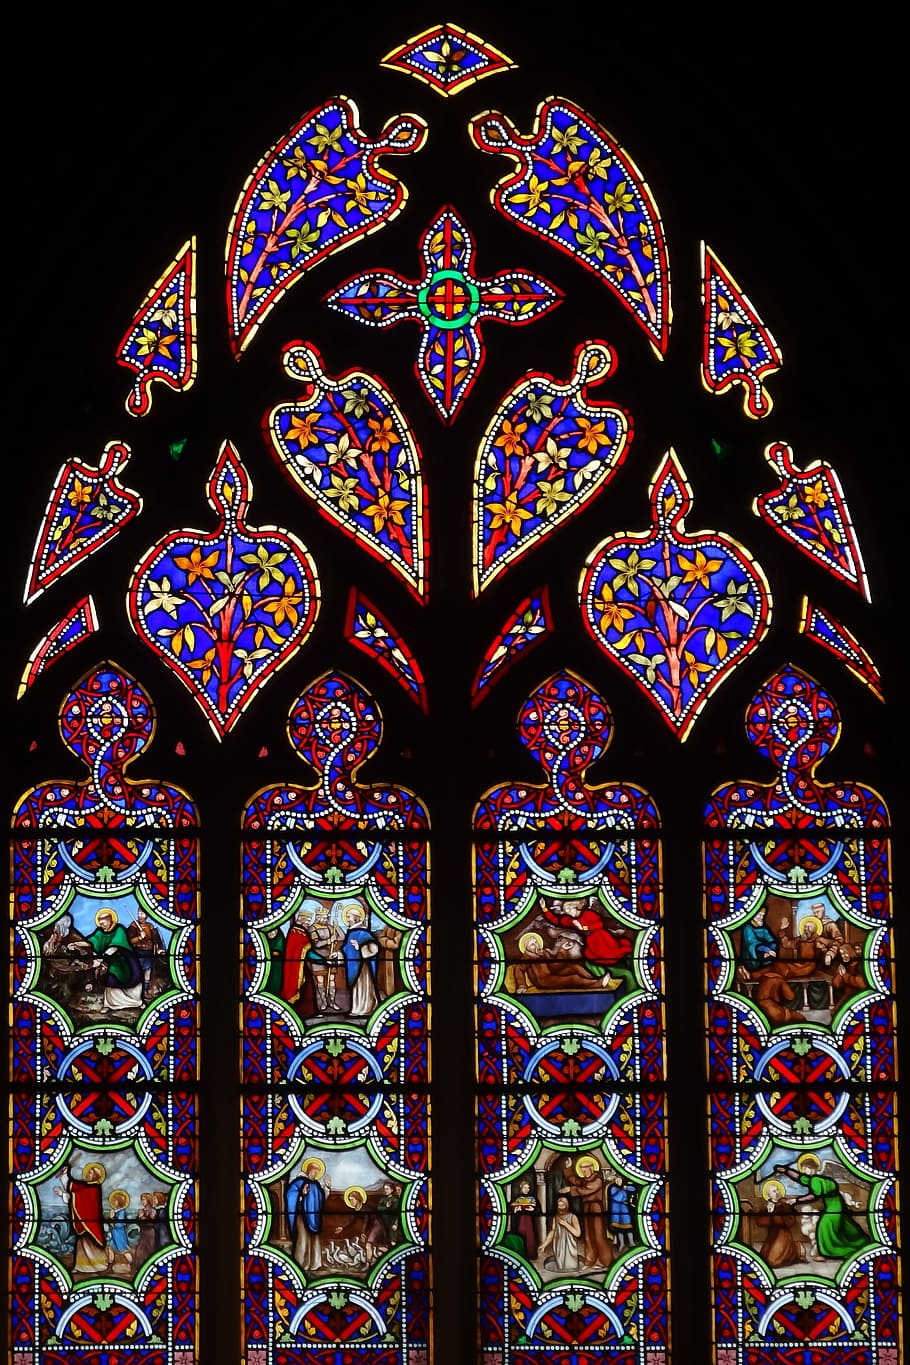 stained glass, stained glass windows, colors, church, religion, heritage, catholic, france, cathedral, window